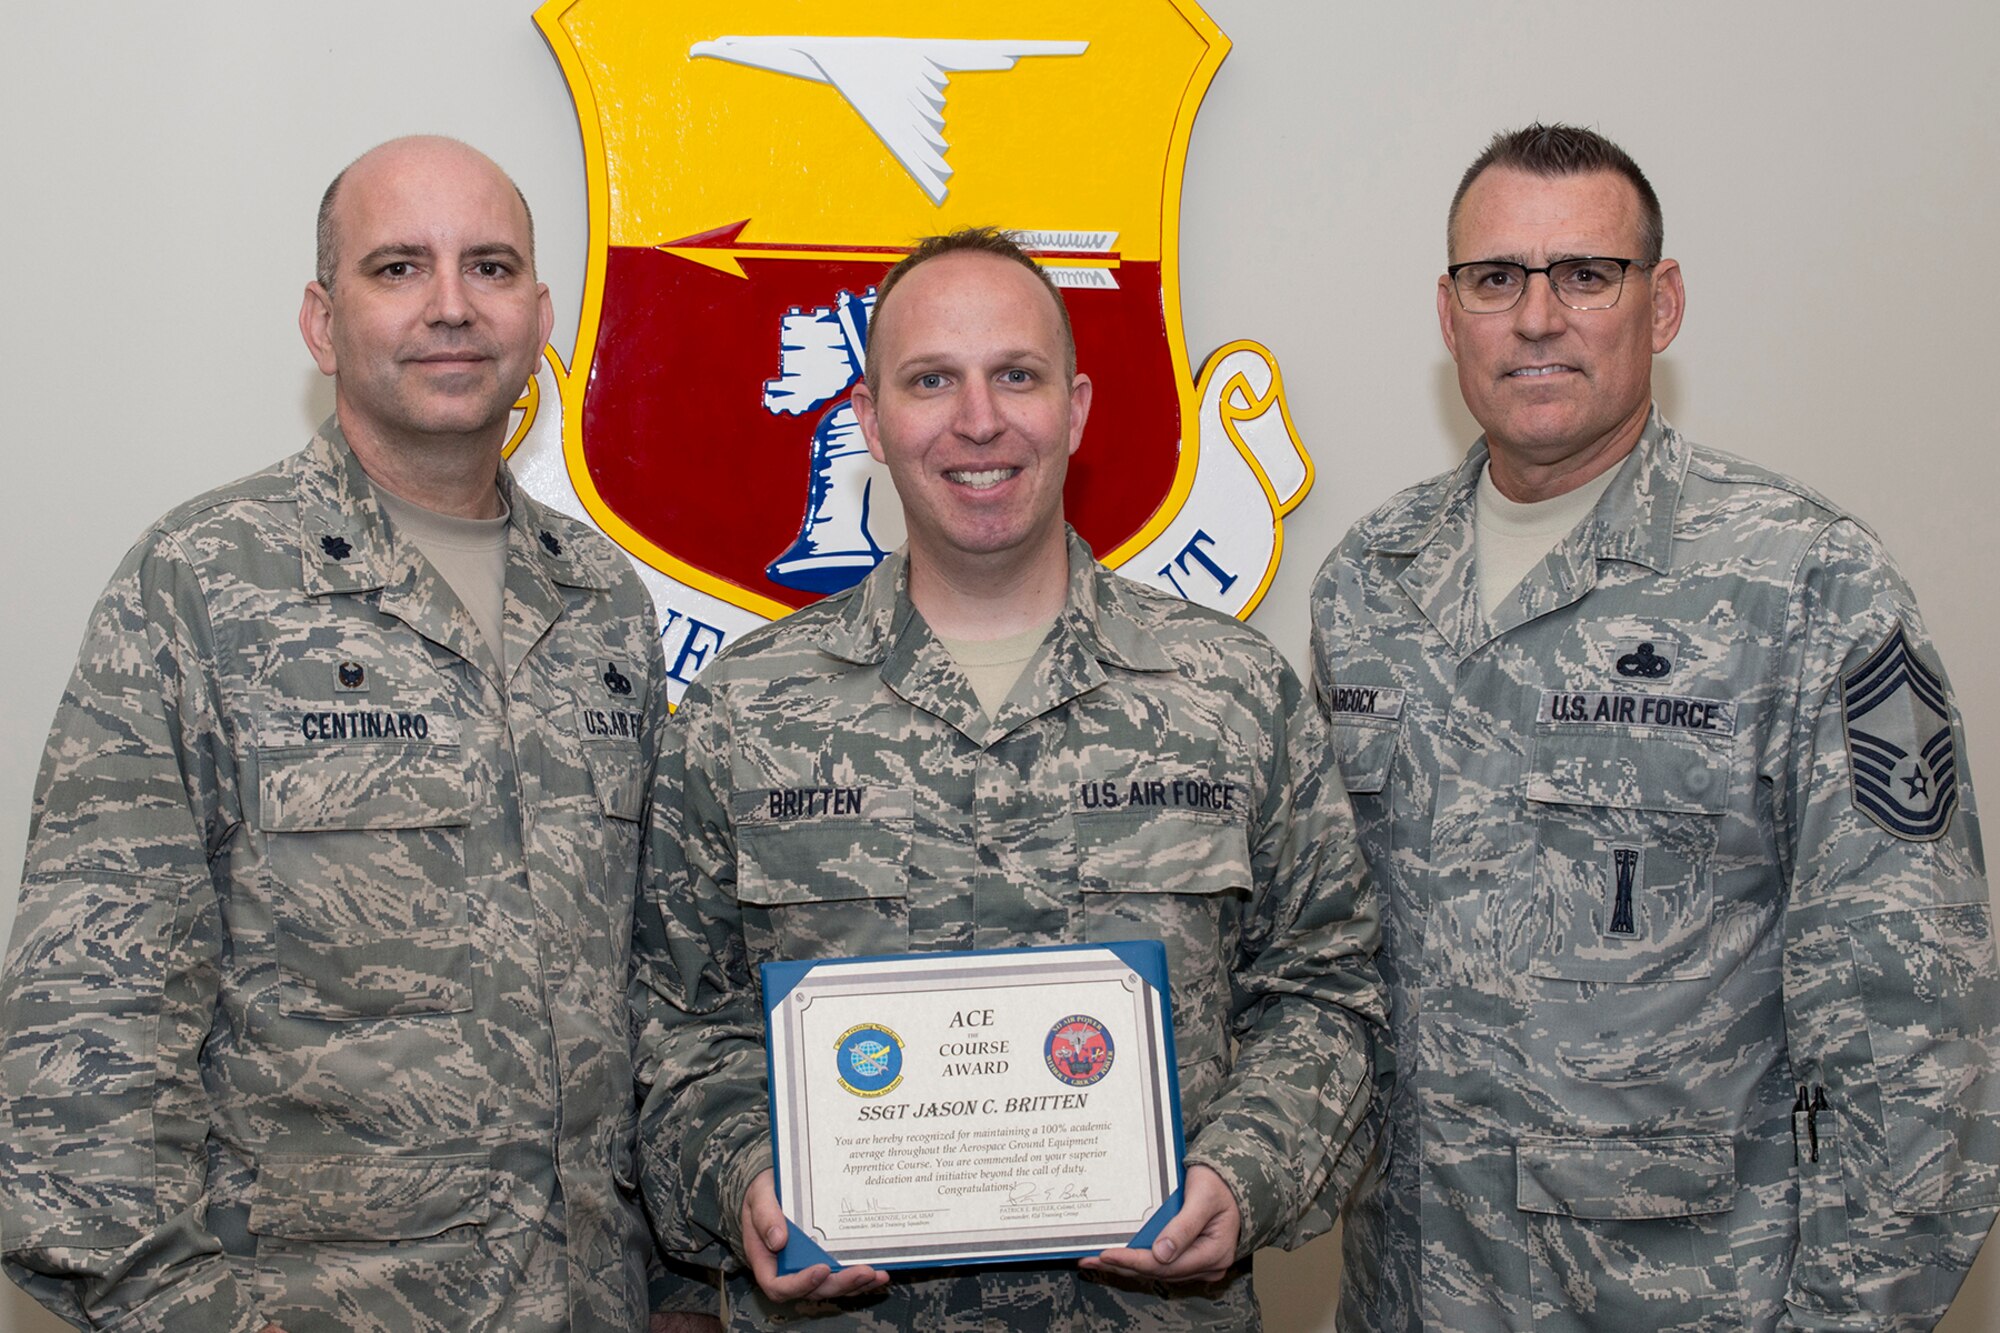 U.S. Air Force Reserve Lt. Col. Paul Centinaro, commander, 913th Maintenance Squadron, Staff Sgt. Jason C. Britten, aerospace ground equipment apprentice, 913 MXS, and Chief Master Sgt. Ralph E. Babcock II, superintendent, 913th Aircraft Maintenance Squadron, pose for a photo at Little Rock Air Force Base, Ark., April 5, 2017. Britten received the prestigious ACE Award March 20, 2017, while training at Sheppard AFB, Texas. The ACE award is earned by maintaining a perfect 100 percent on all tests and evaluations through an entire course. (U.S. Air Force photo by Master Sgt. Jeff Walston/Released)